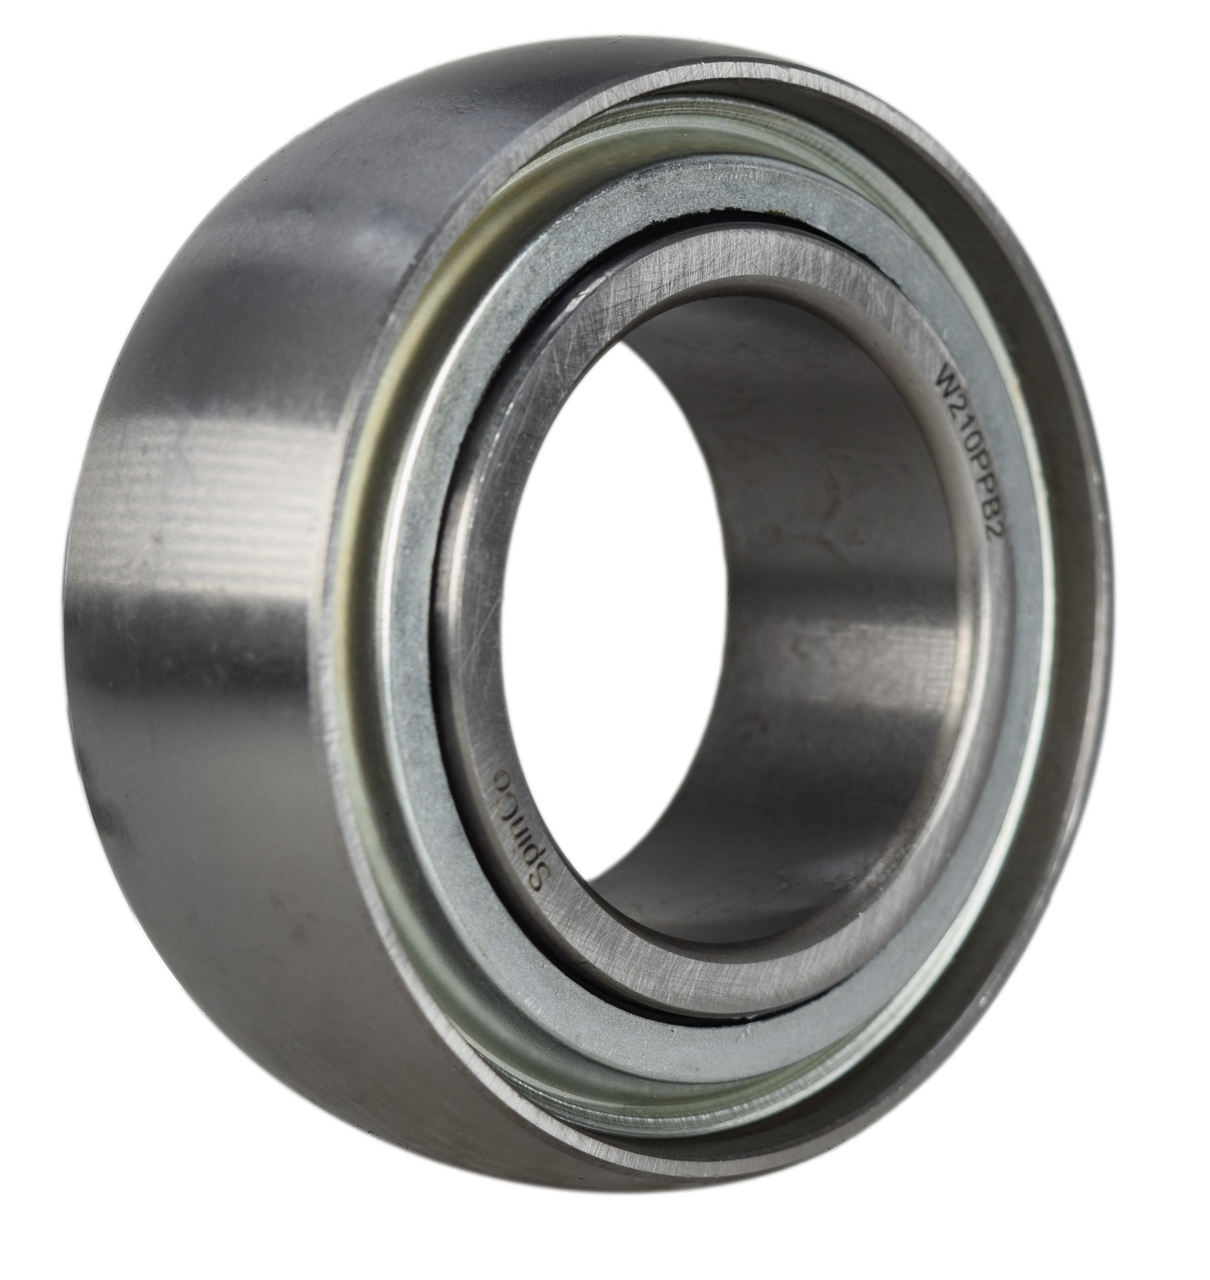 Non-Relubricable 1.1880 Inner Ring Width Round Bore 1.1880 Outer Ring Width 3.5430 Spherical OD Peer Bearing W210PPB2 Agriculture Heavy Duty Disc Harrow Bearing Two Triple Lip Seals 1.9380 ID 